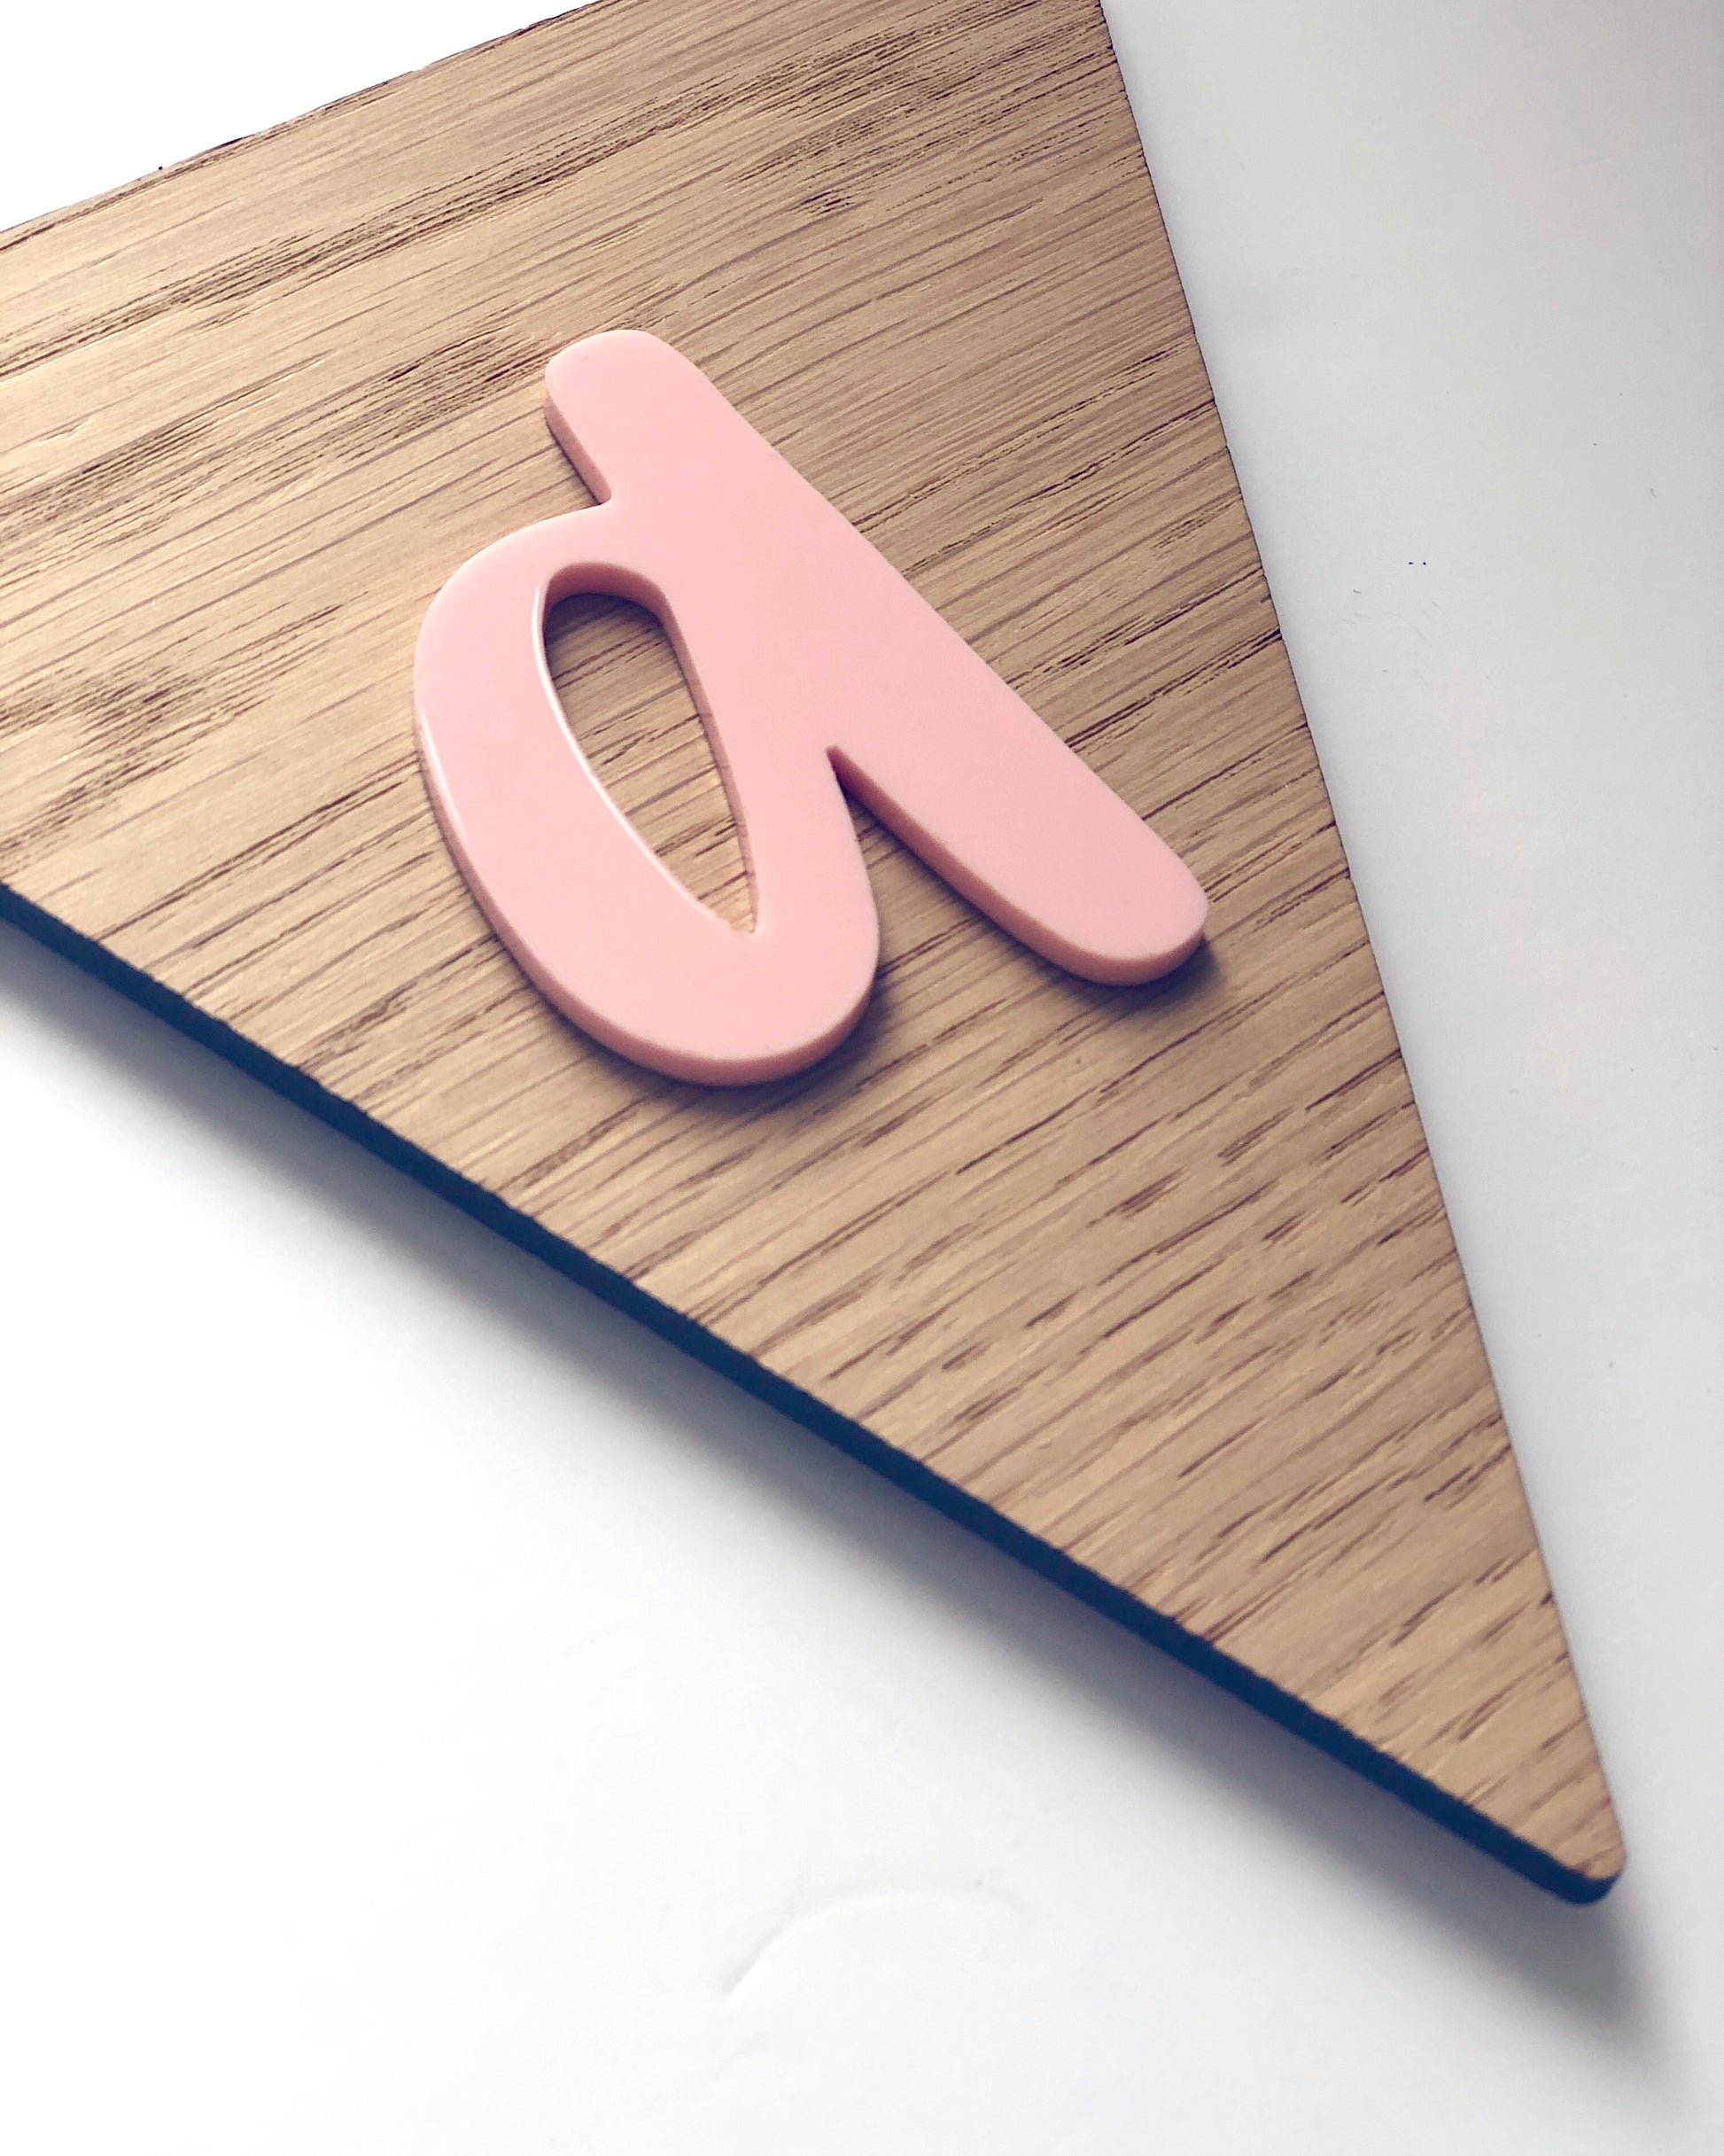 wooden bunting flag with pink acrylic letter